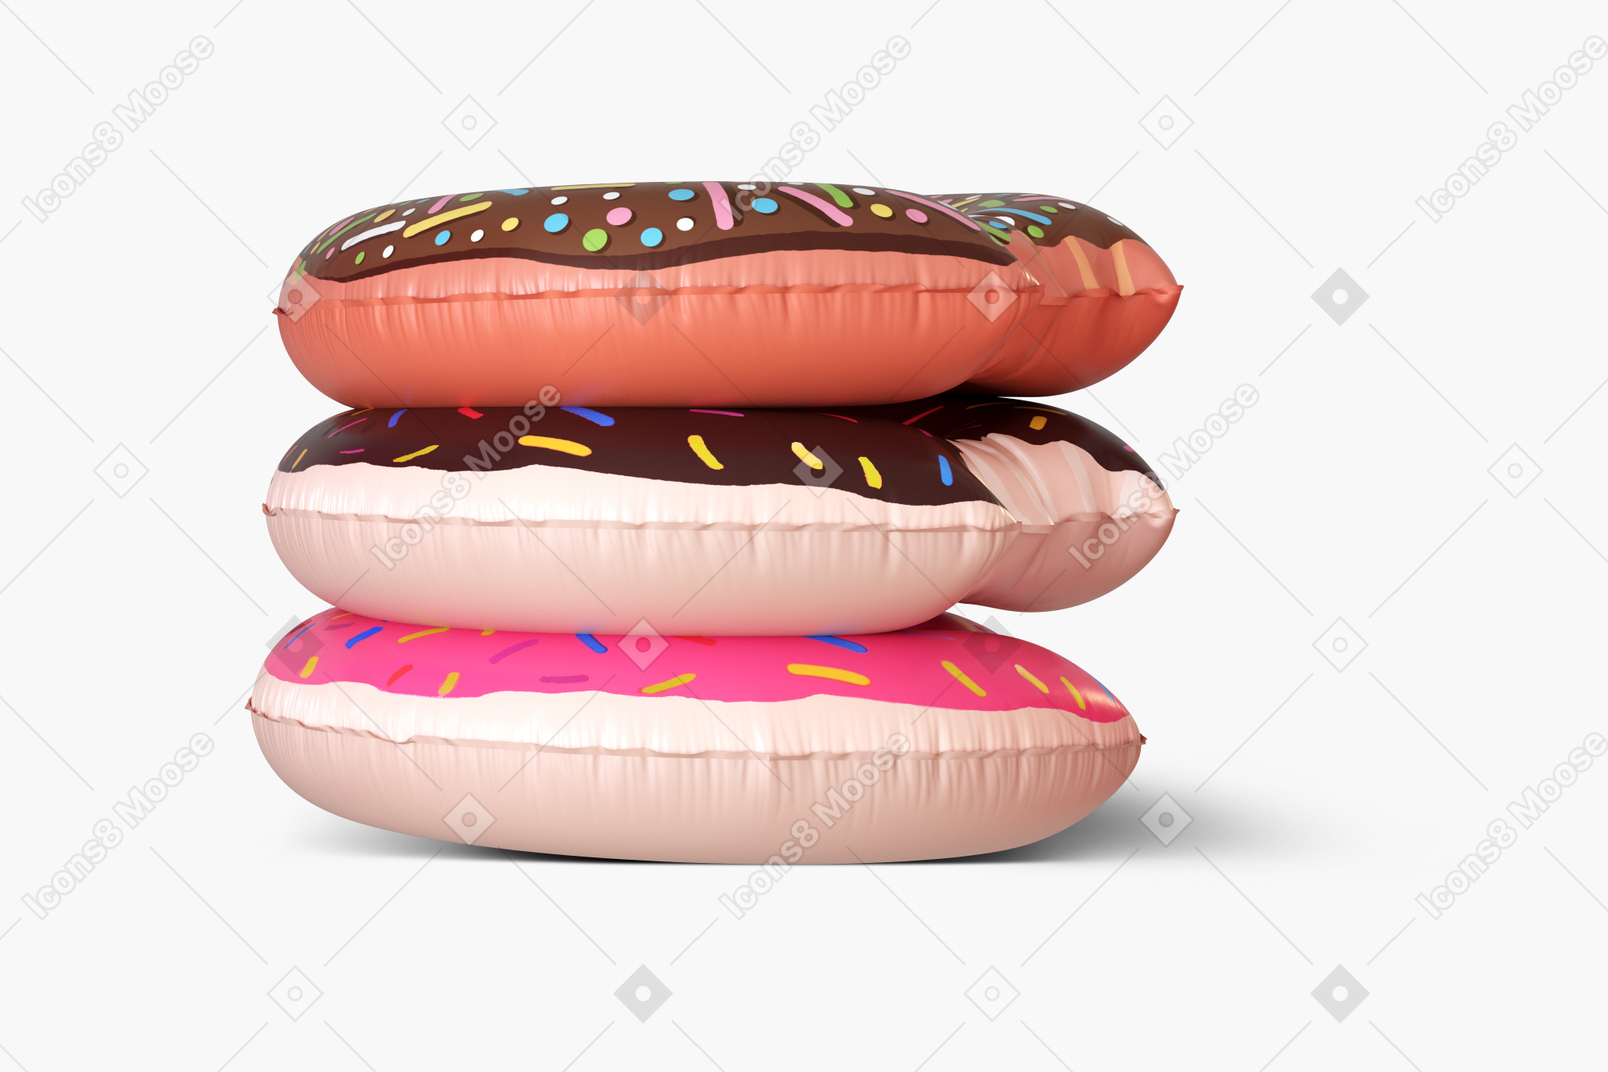 Donut rubber ring placed on each other on white background